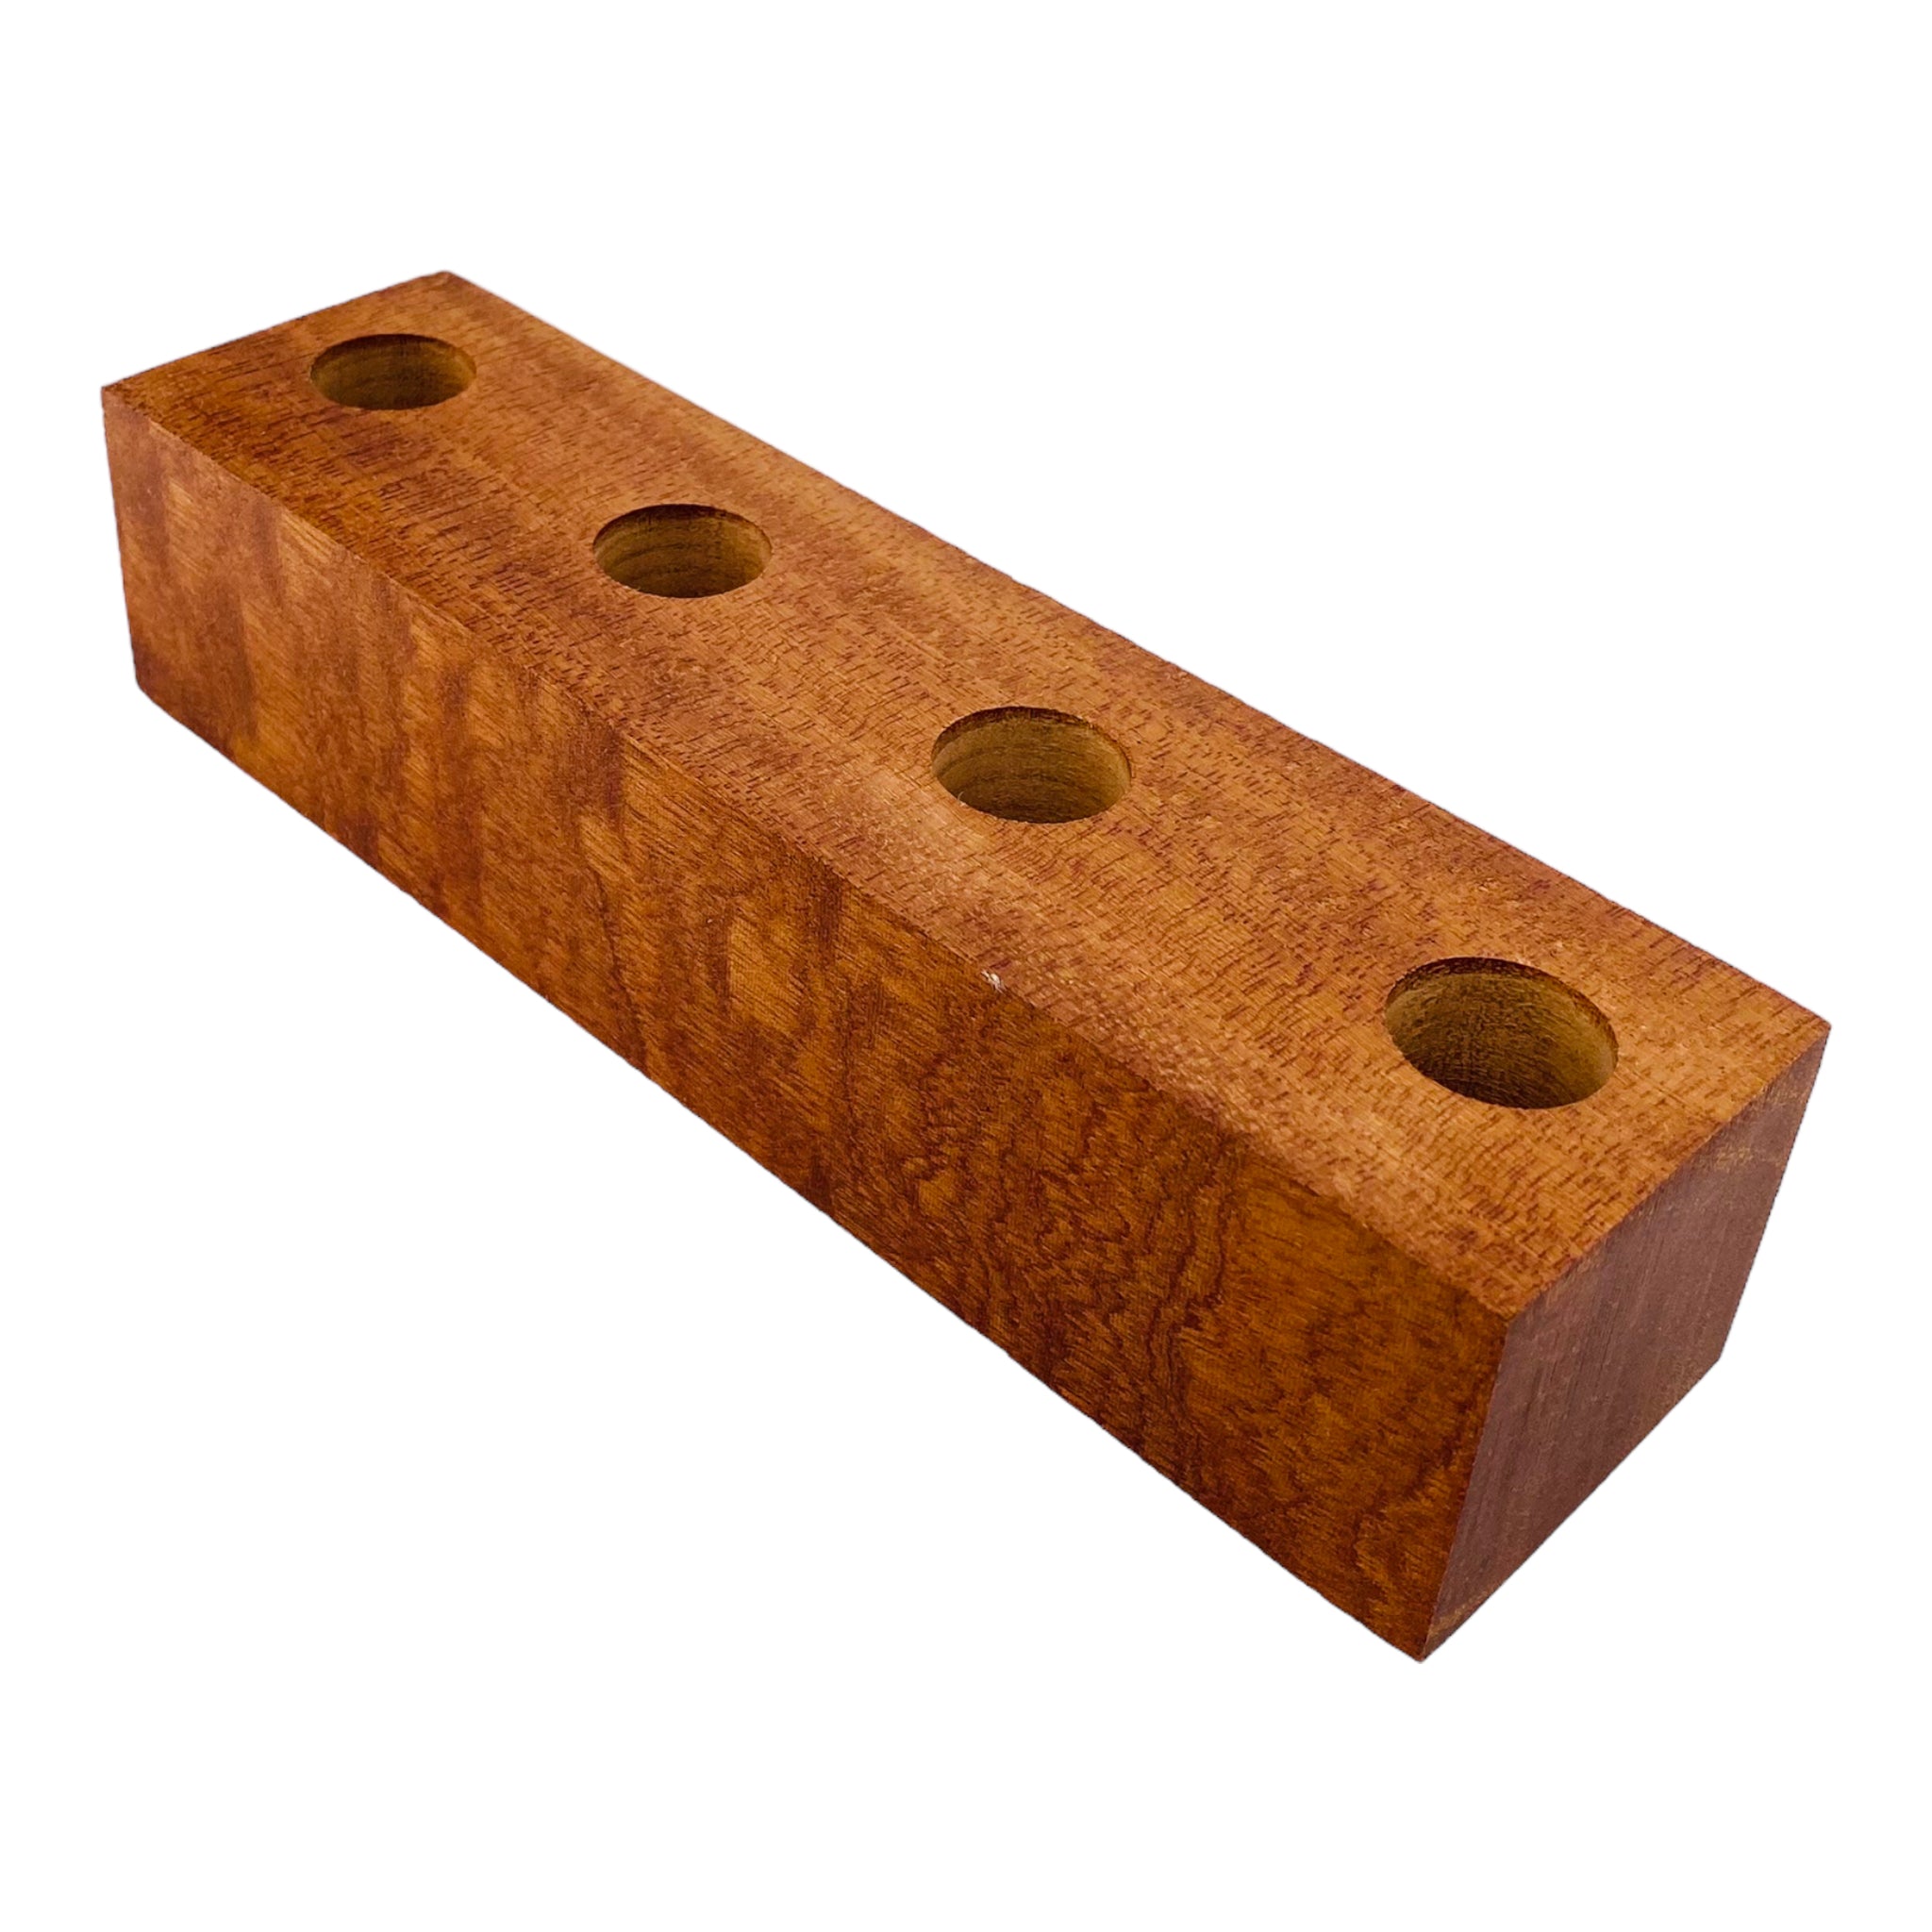 4 Hole Wood Display Stand Holder For 18mm Bong Bowl Pieces Or Quartz Bangers - Mahogany